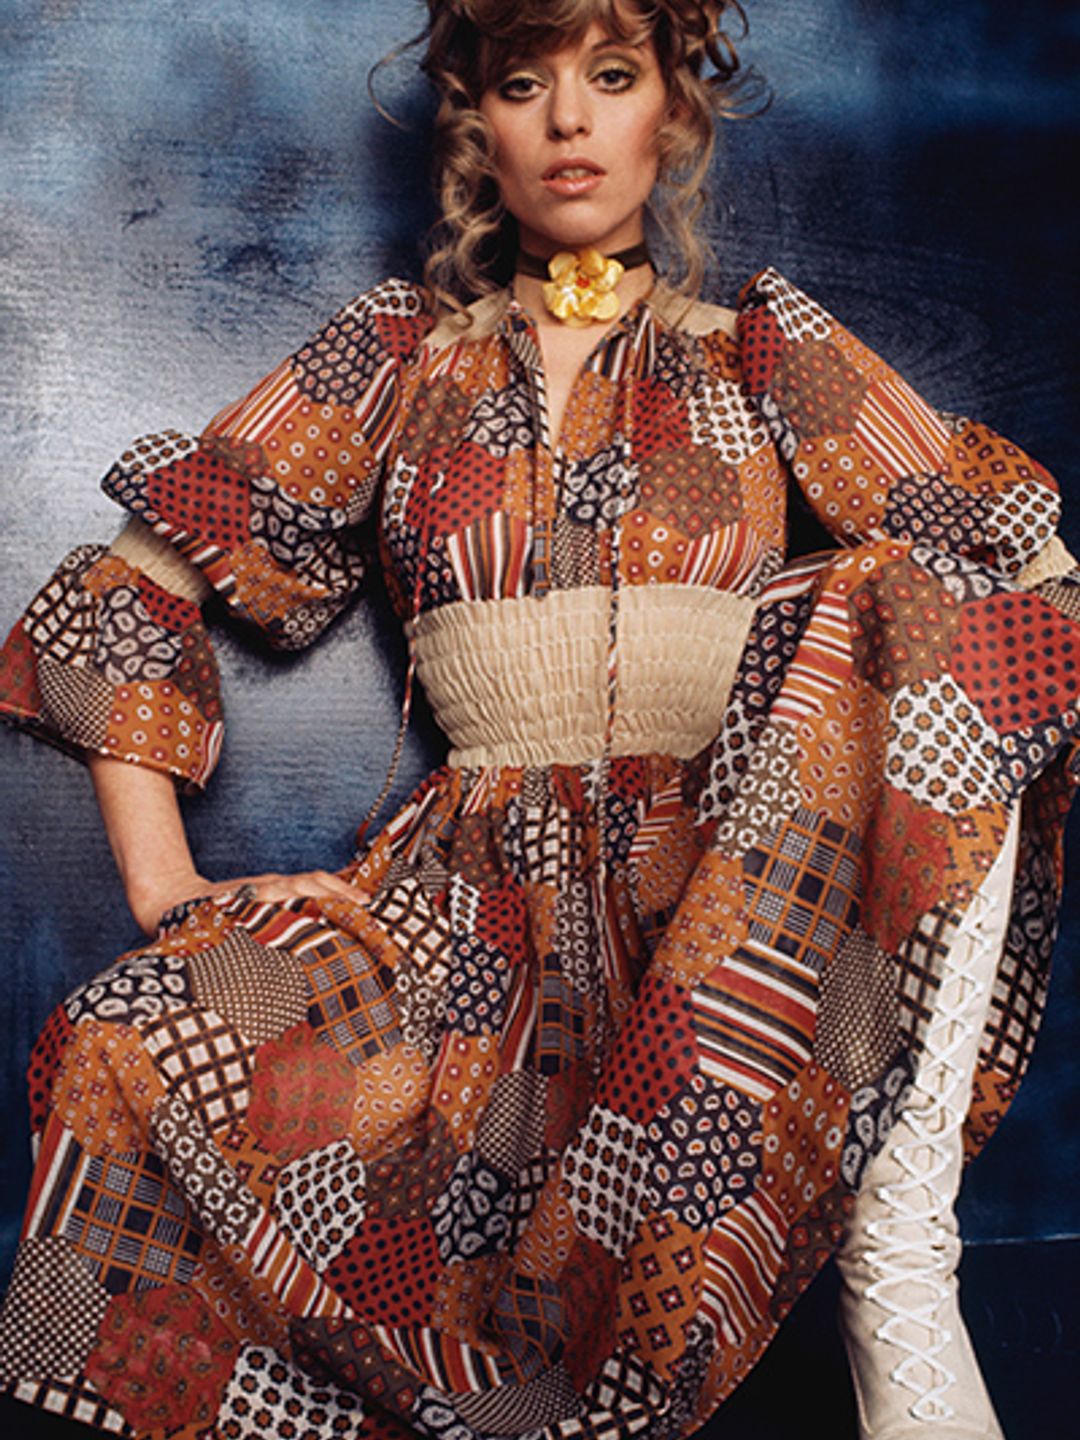 Womans fashion in the 70s was also cool and laid back. Woman wore colorful  disco team clothing that was a huge differ…